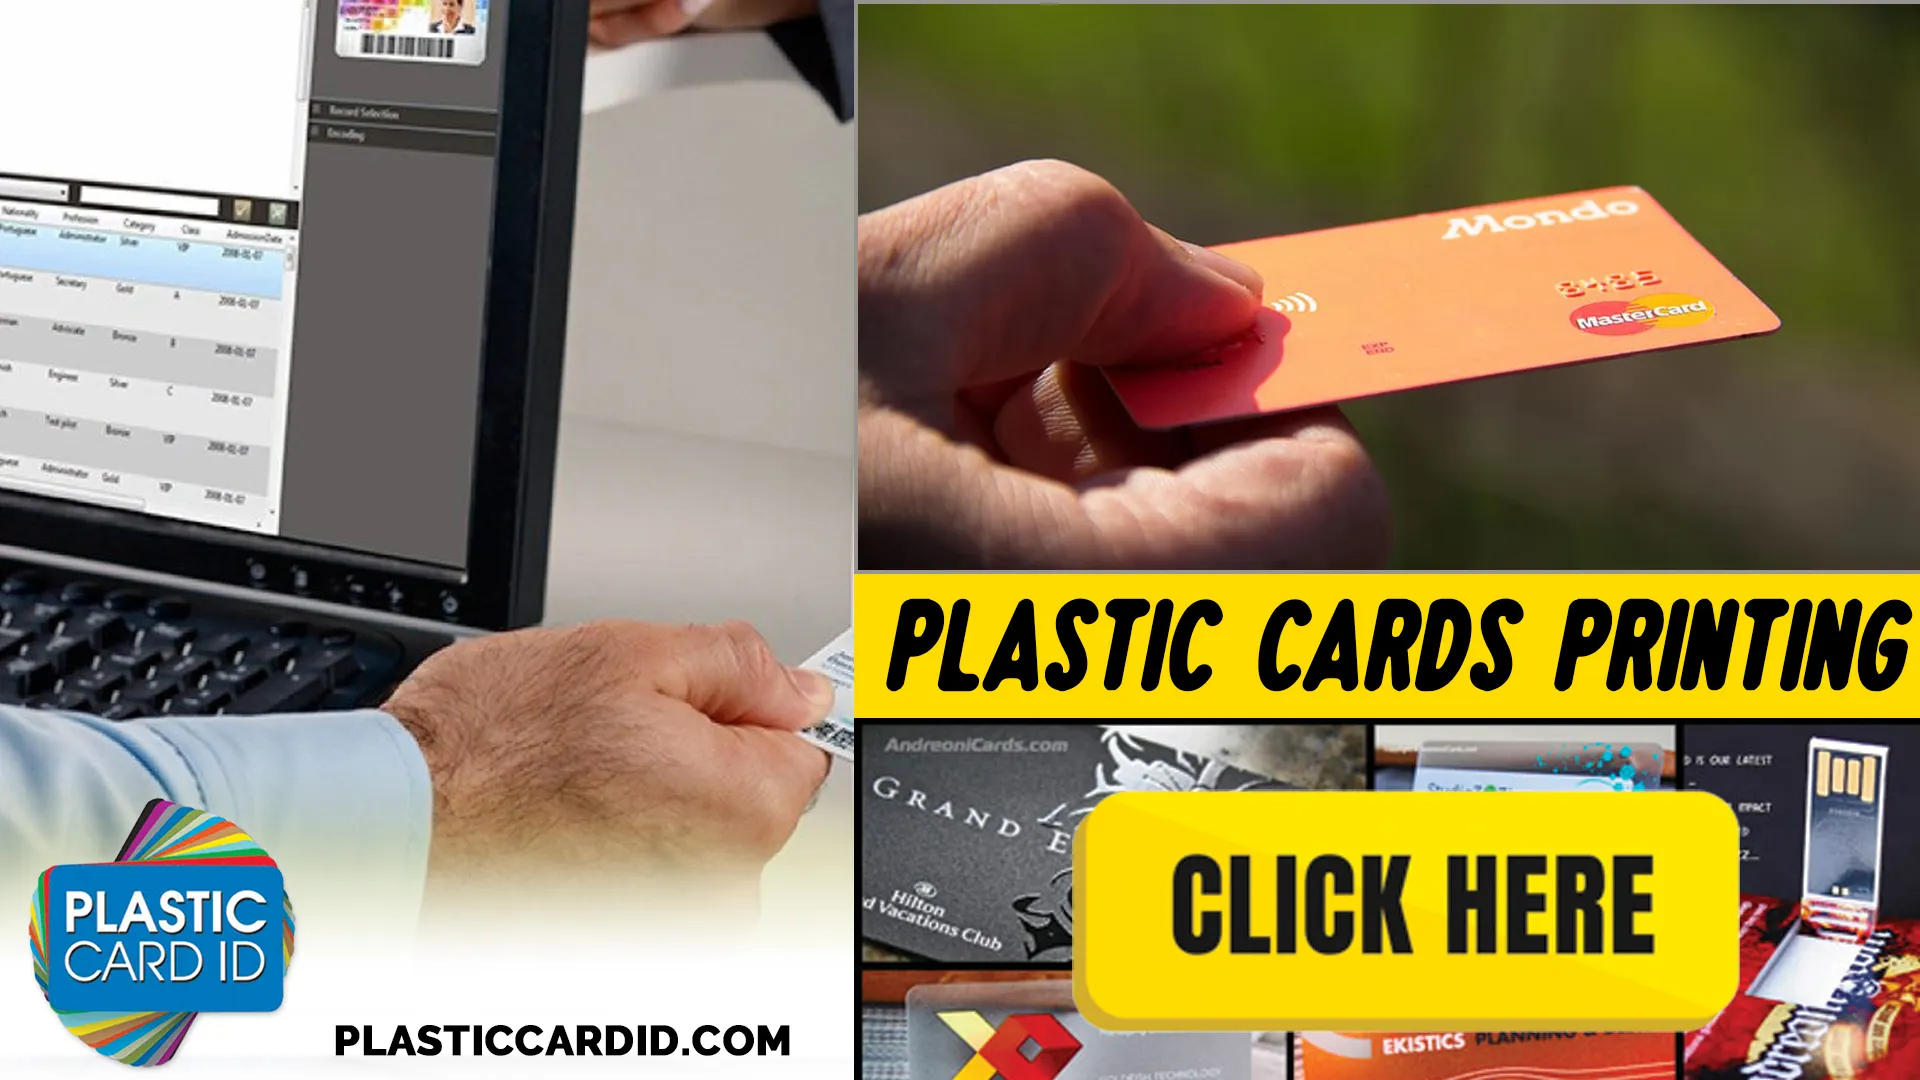 Welcome to Plastic Card ID




: Your Ultimate Partner in Cleaning and Maintaining Plastic Cards